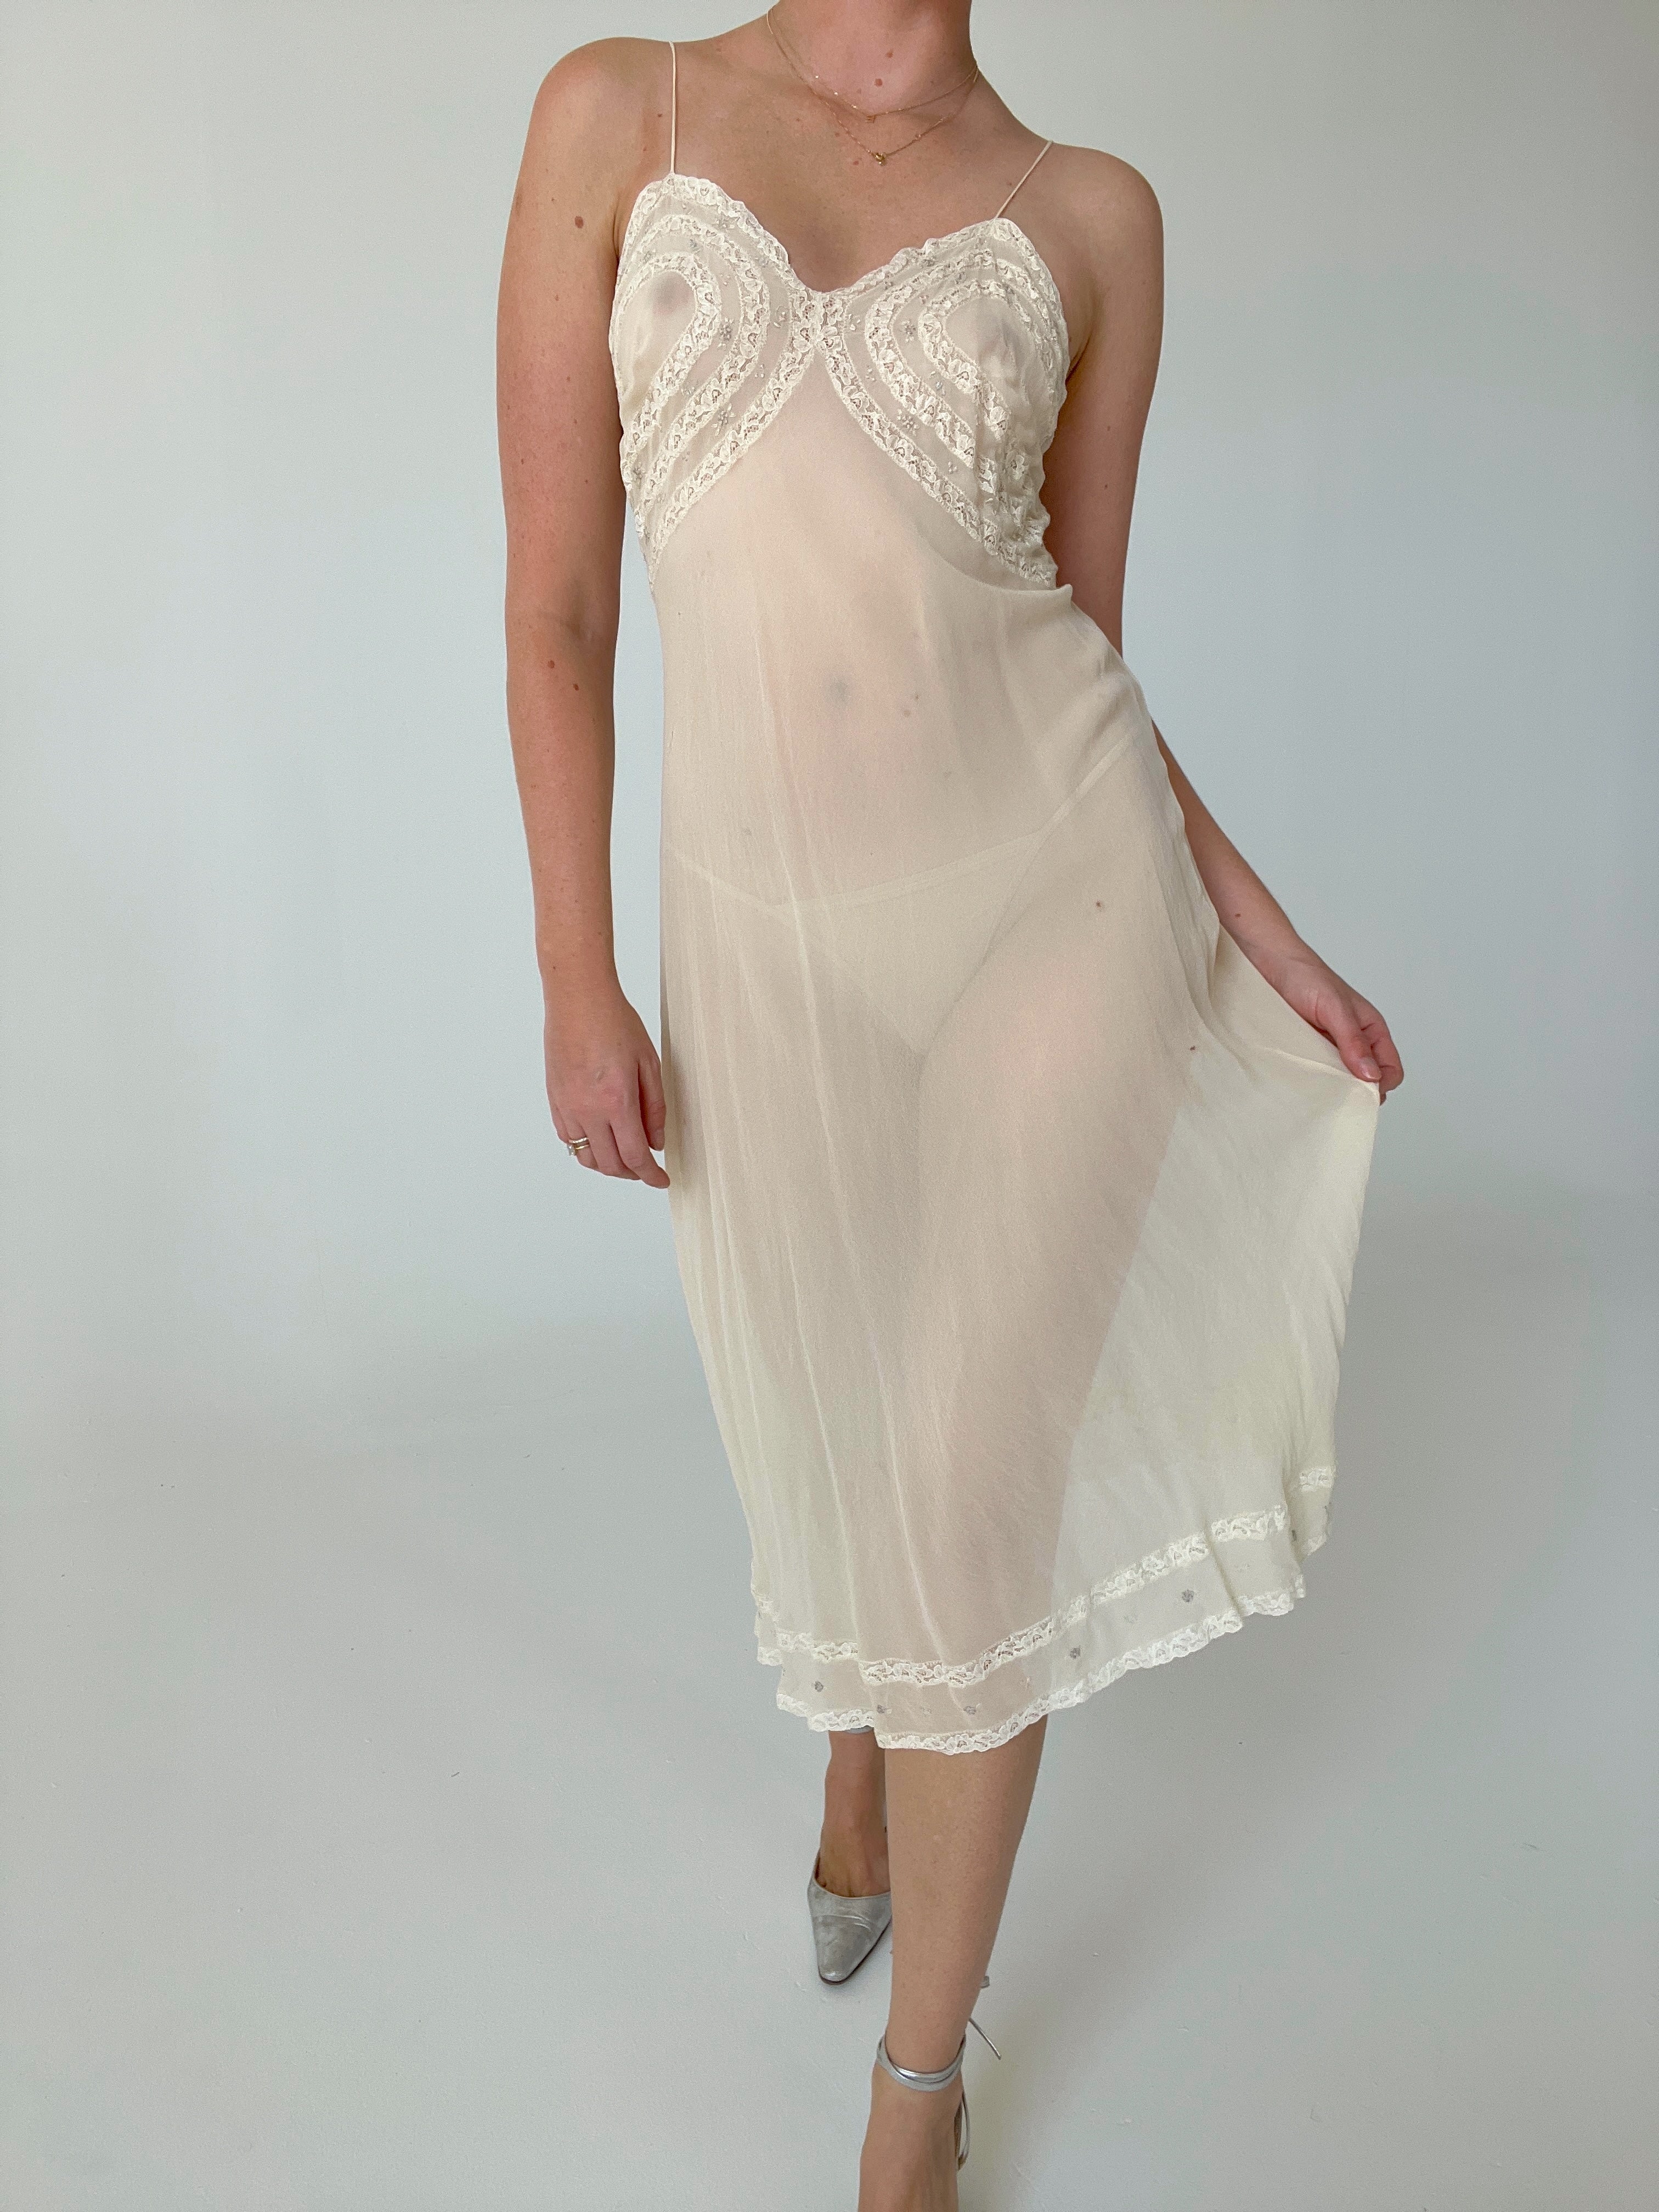 1930's Silk Chiffon Slip with Floral Embroidery